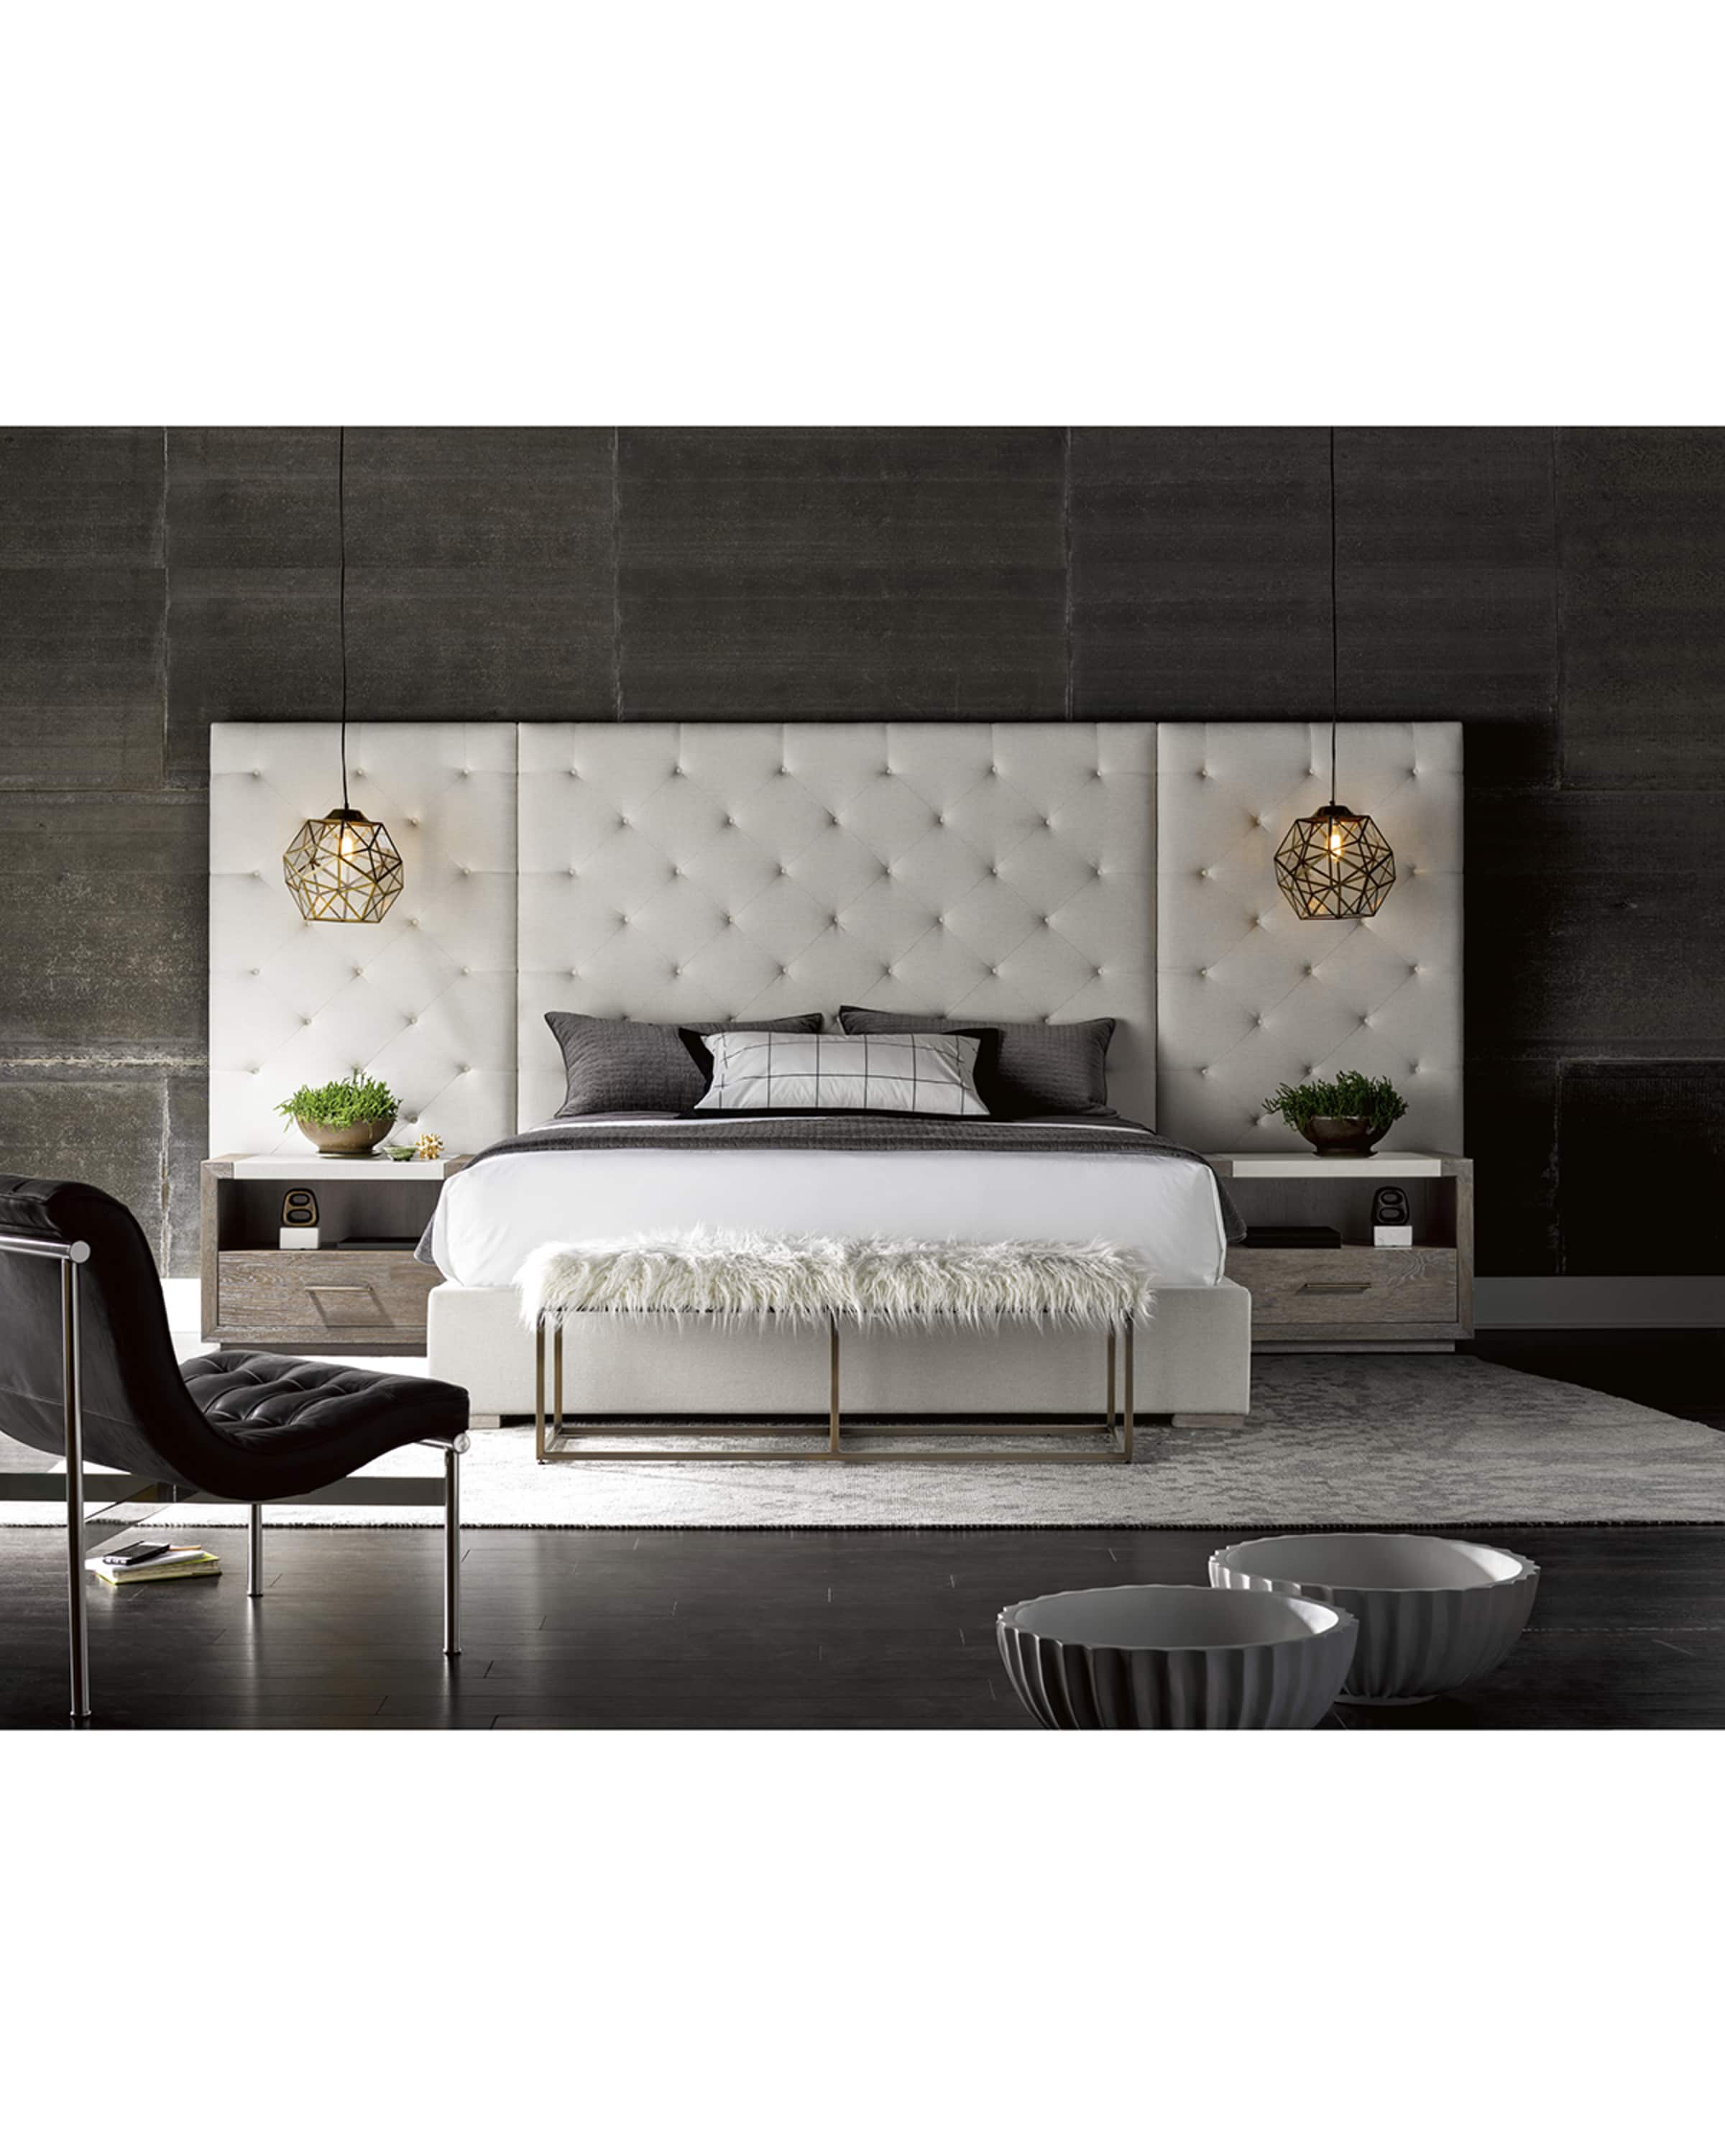 Universal Furniture Parigi Tufted Queen Bed with Panels